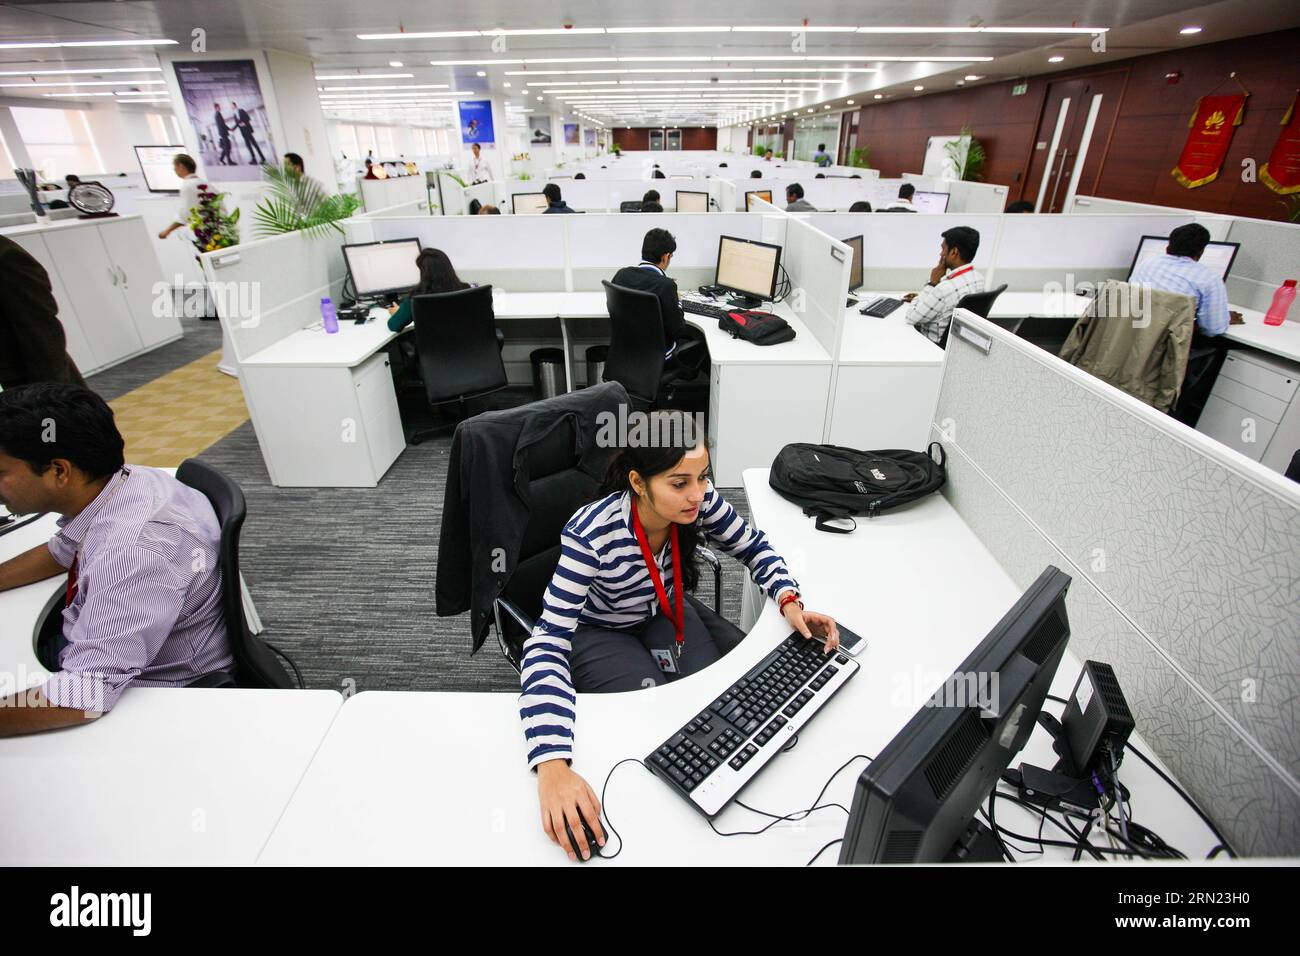 (150205) -- BENGALURU, Feb. 5, 2015 -- Employees work at Huawei s new research and development center in Bengaluru, India, Feb. 5, 2015. Chinese multinational networking and telecommunications equipment and services company Huawei on Thursday launched its new research and development center in Bengaluru. With an investment of 170 million U.S. dollars and an area of 20 acres, it is the largest research and development center of Huawei outside of China. The new center is also an exhibit of cooperation between China and India in the field of information and communications technology (ICT). )(azp) Stock Photo